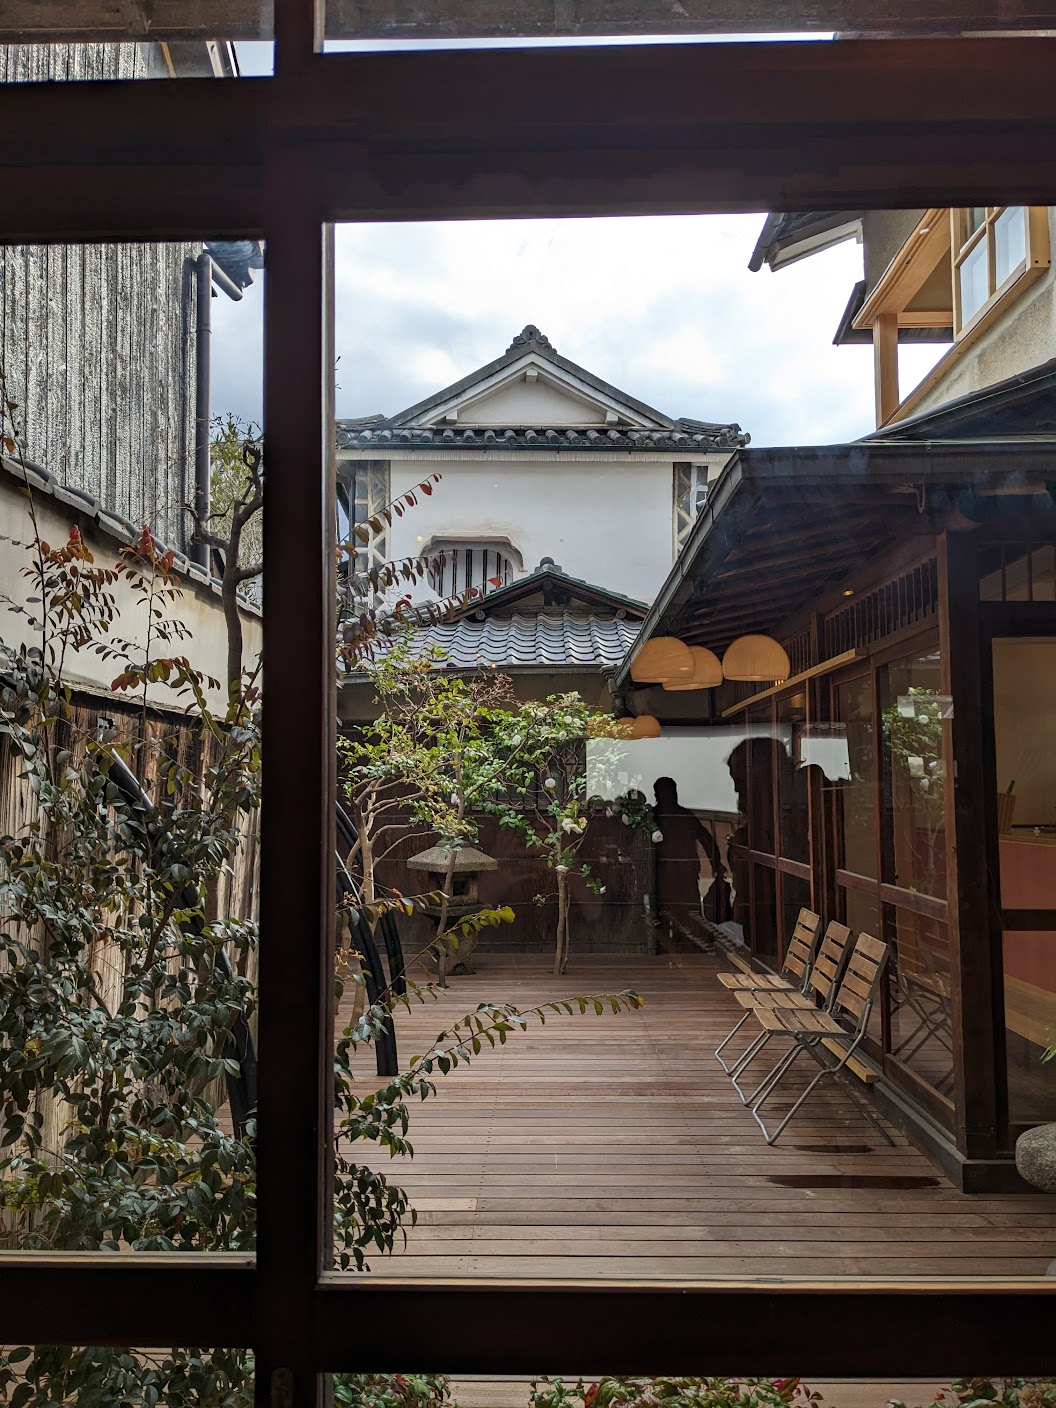 Recommendations and Reflections from a New Yorker's First Time in Japan